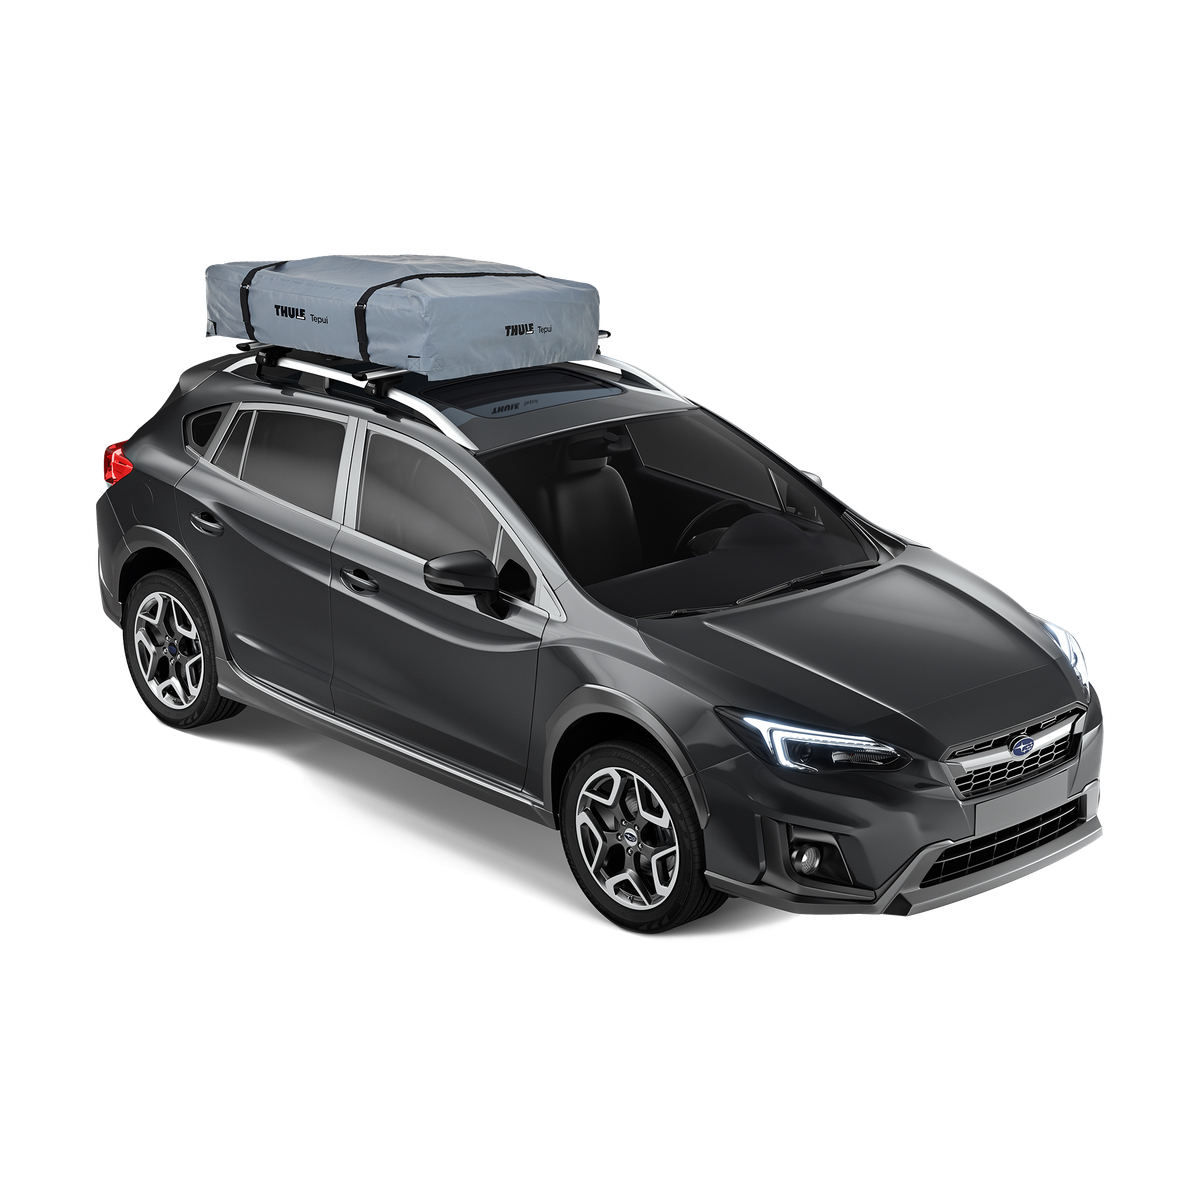 Thule Tepui Ayer 2-person roof top tent haze grey